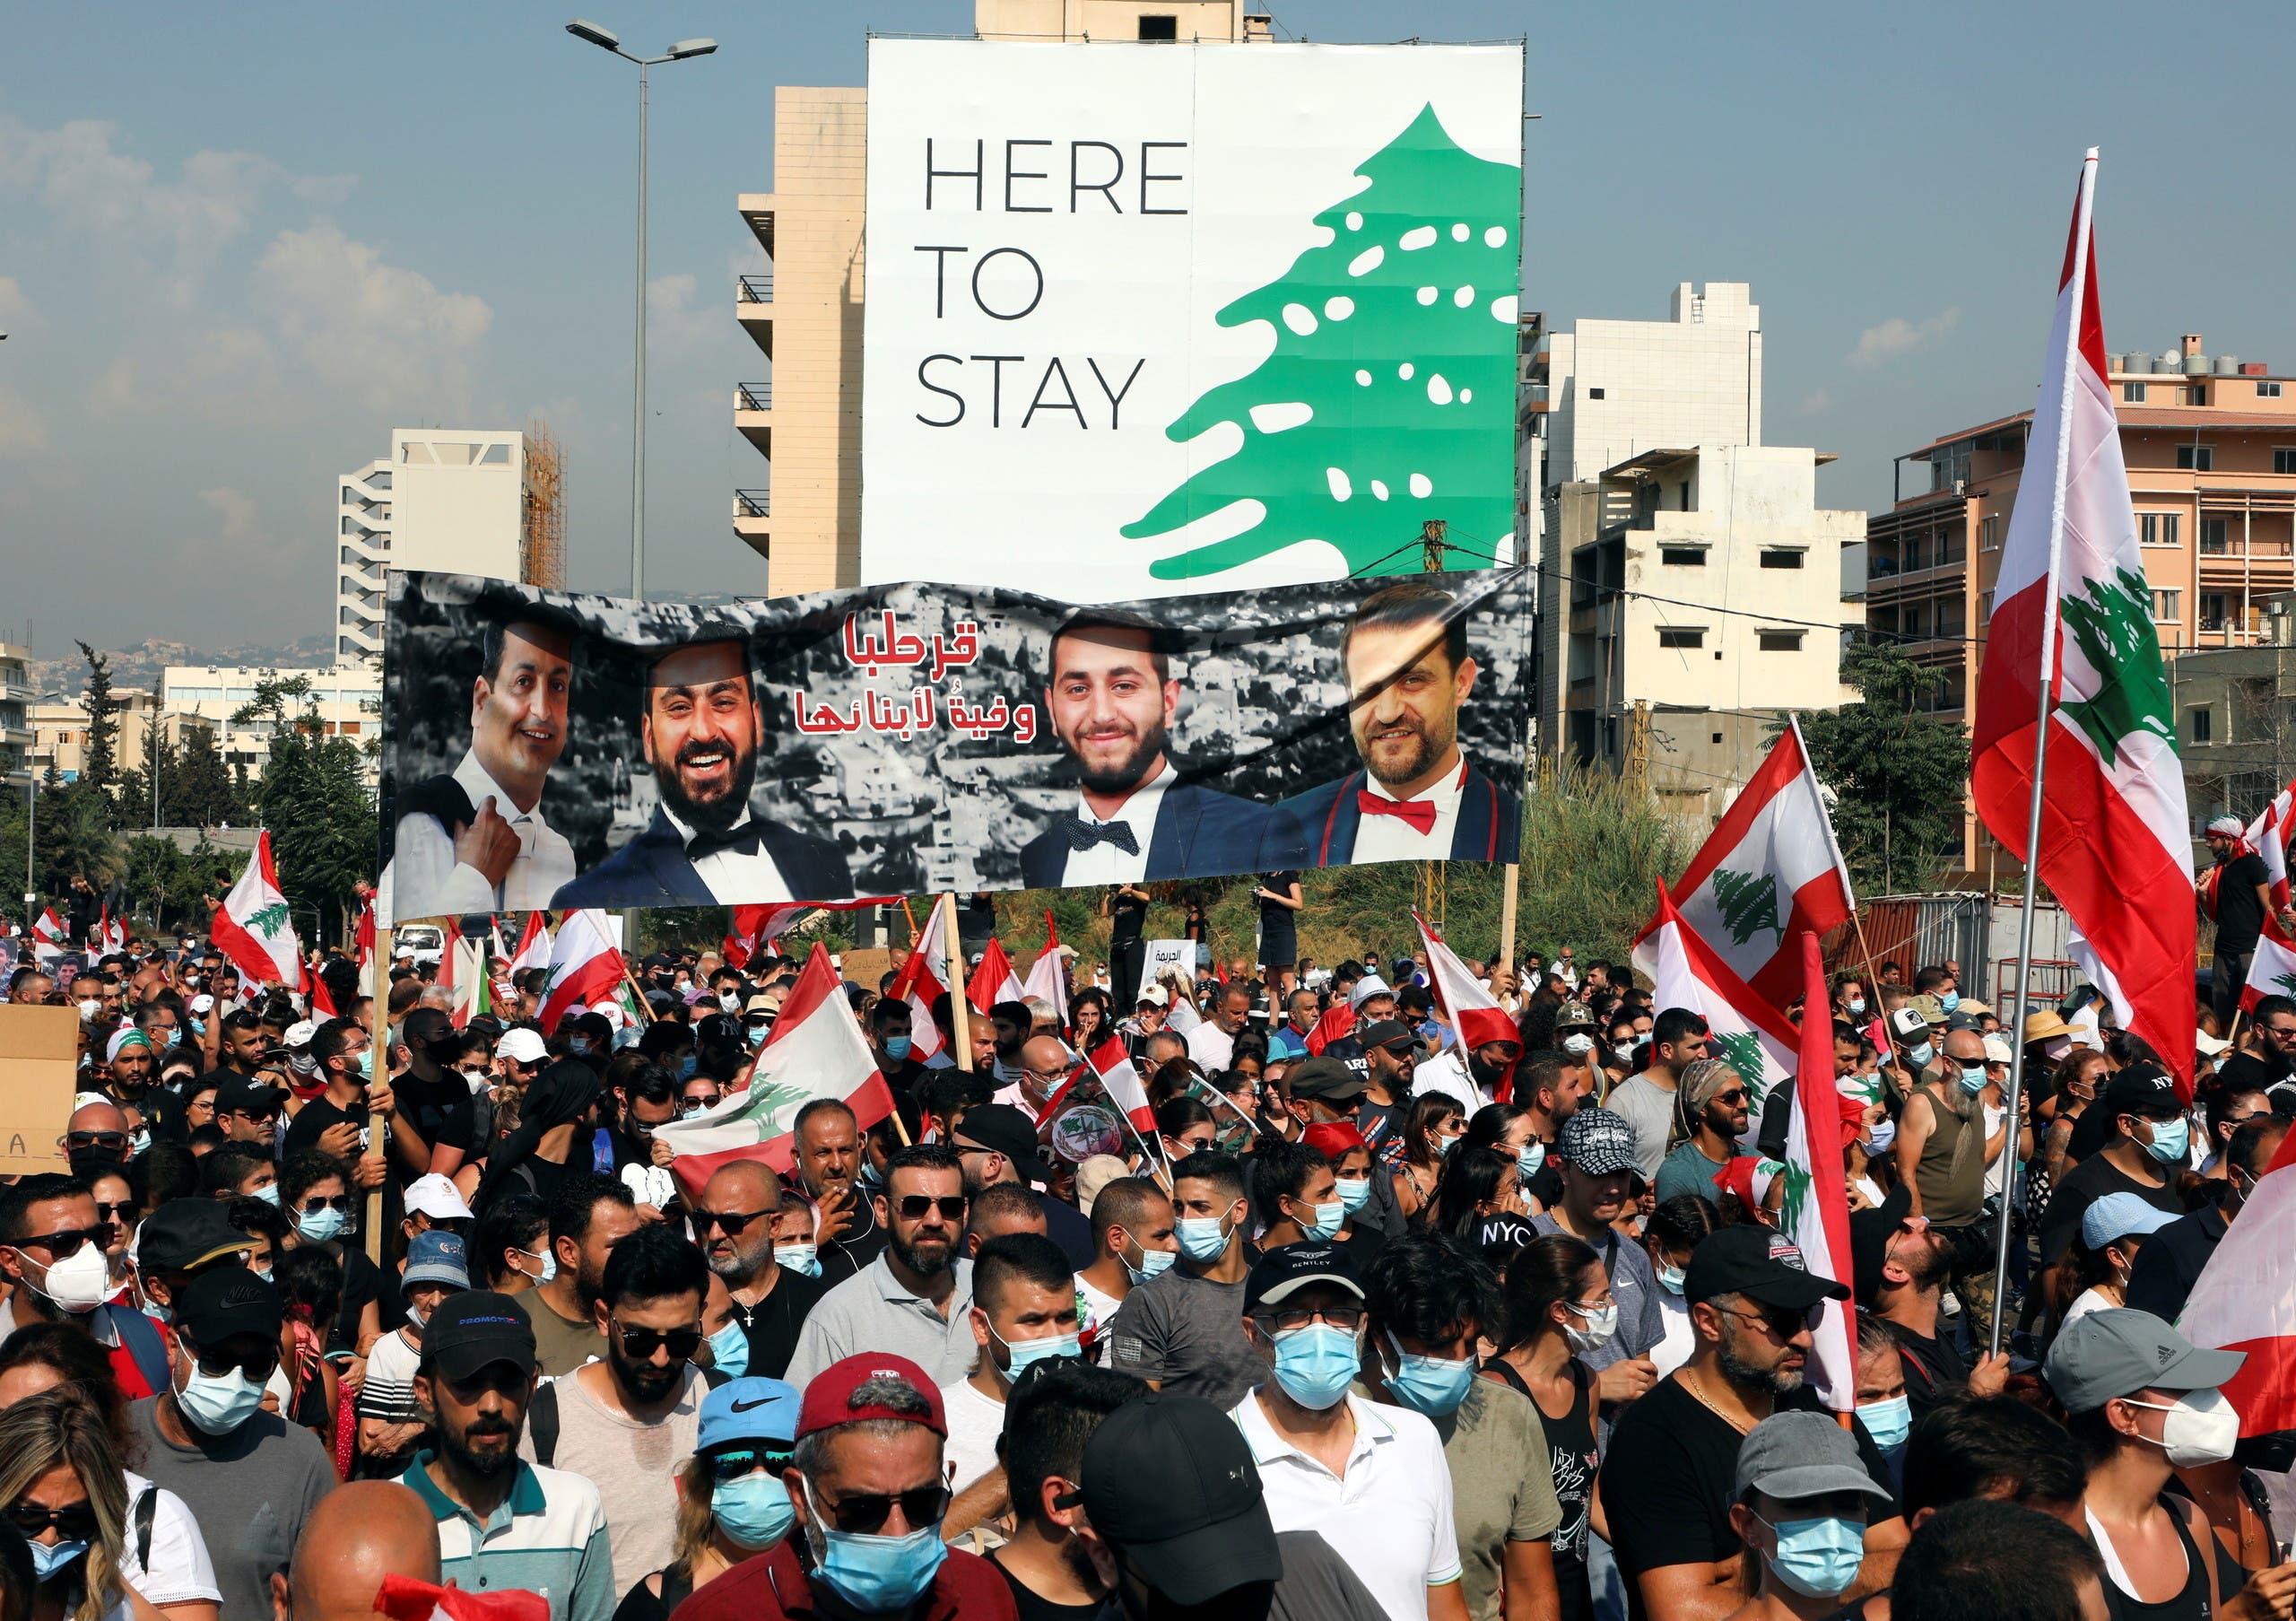 From today's demonstration in Beirut